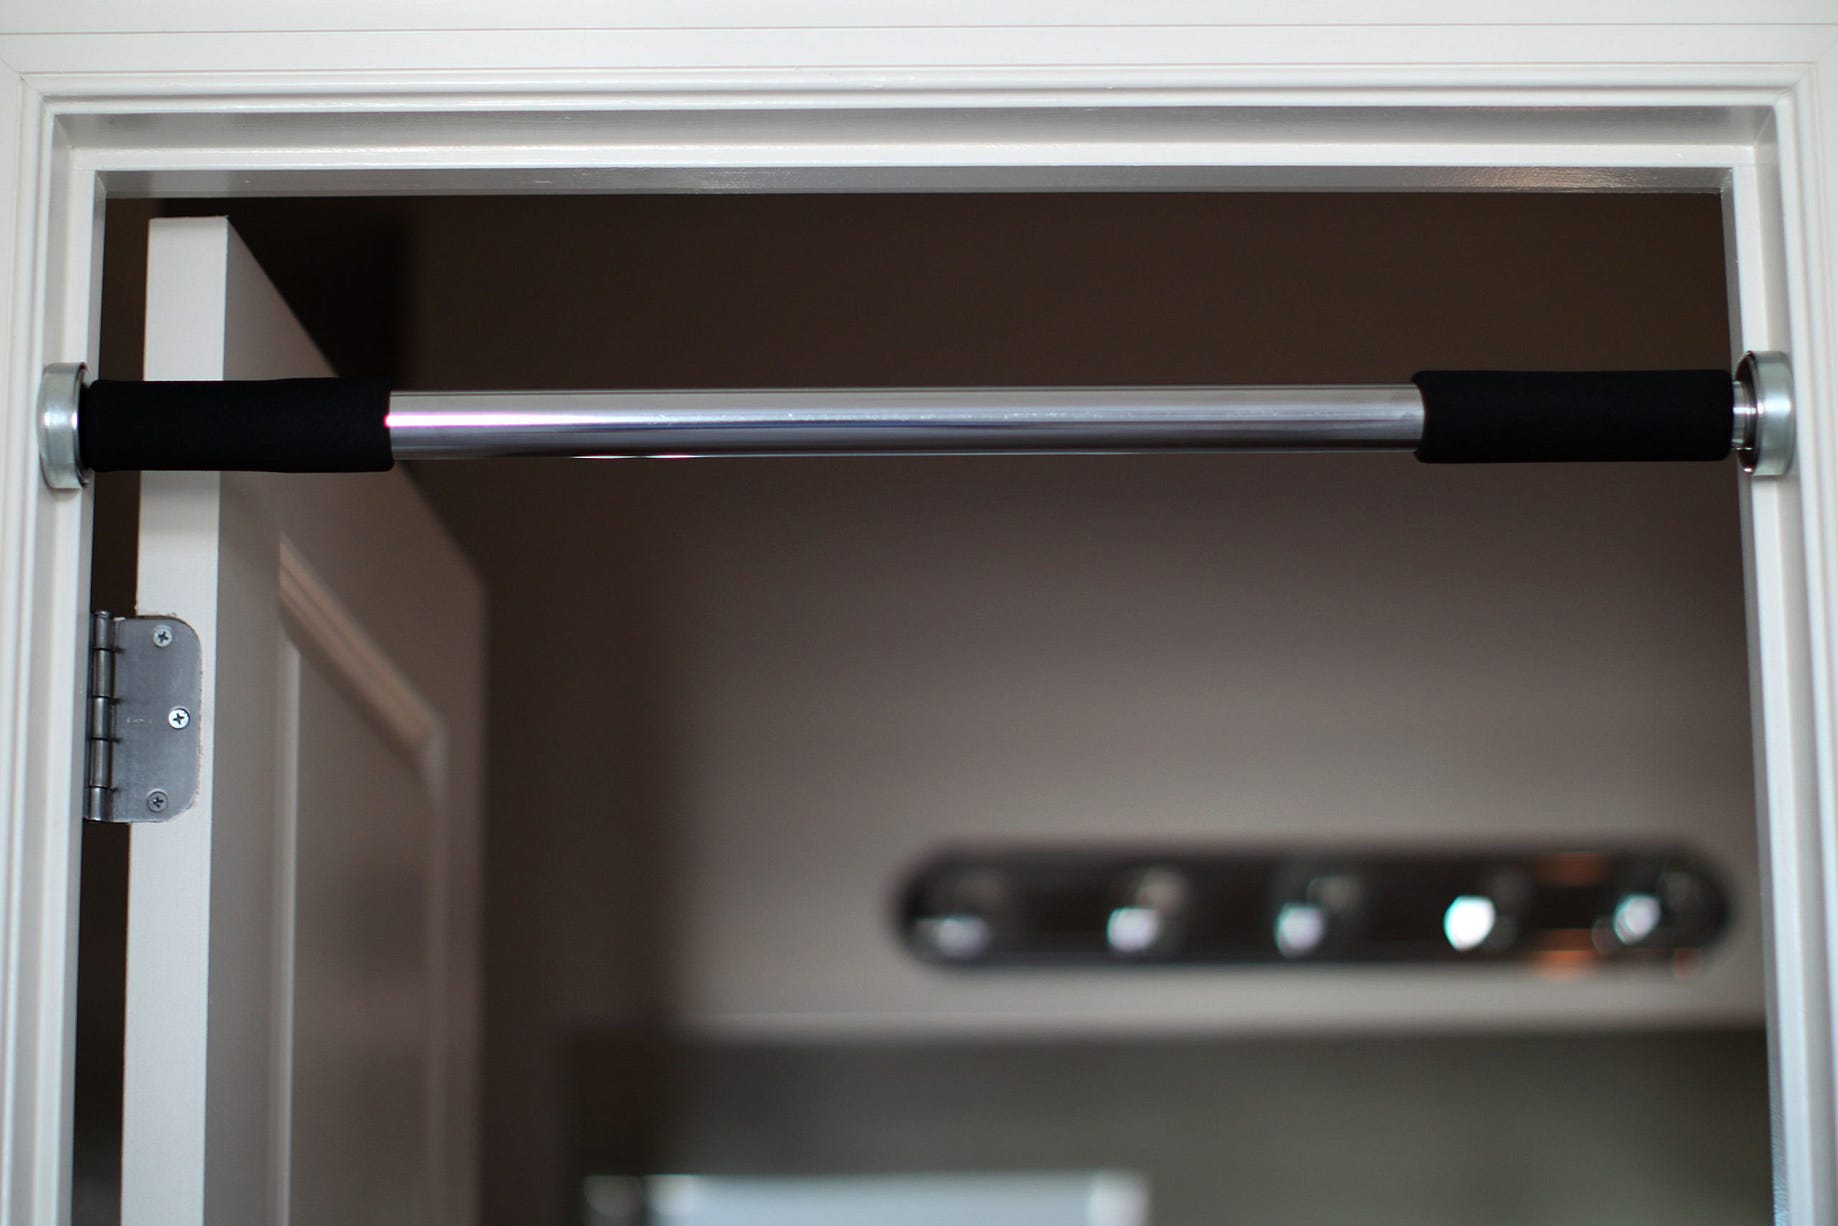 Best Doorway Pull-up Bar 2020 | by ThenicsWorkout | Medium